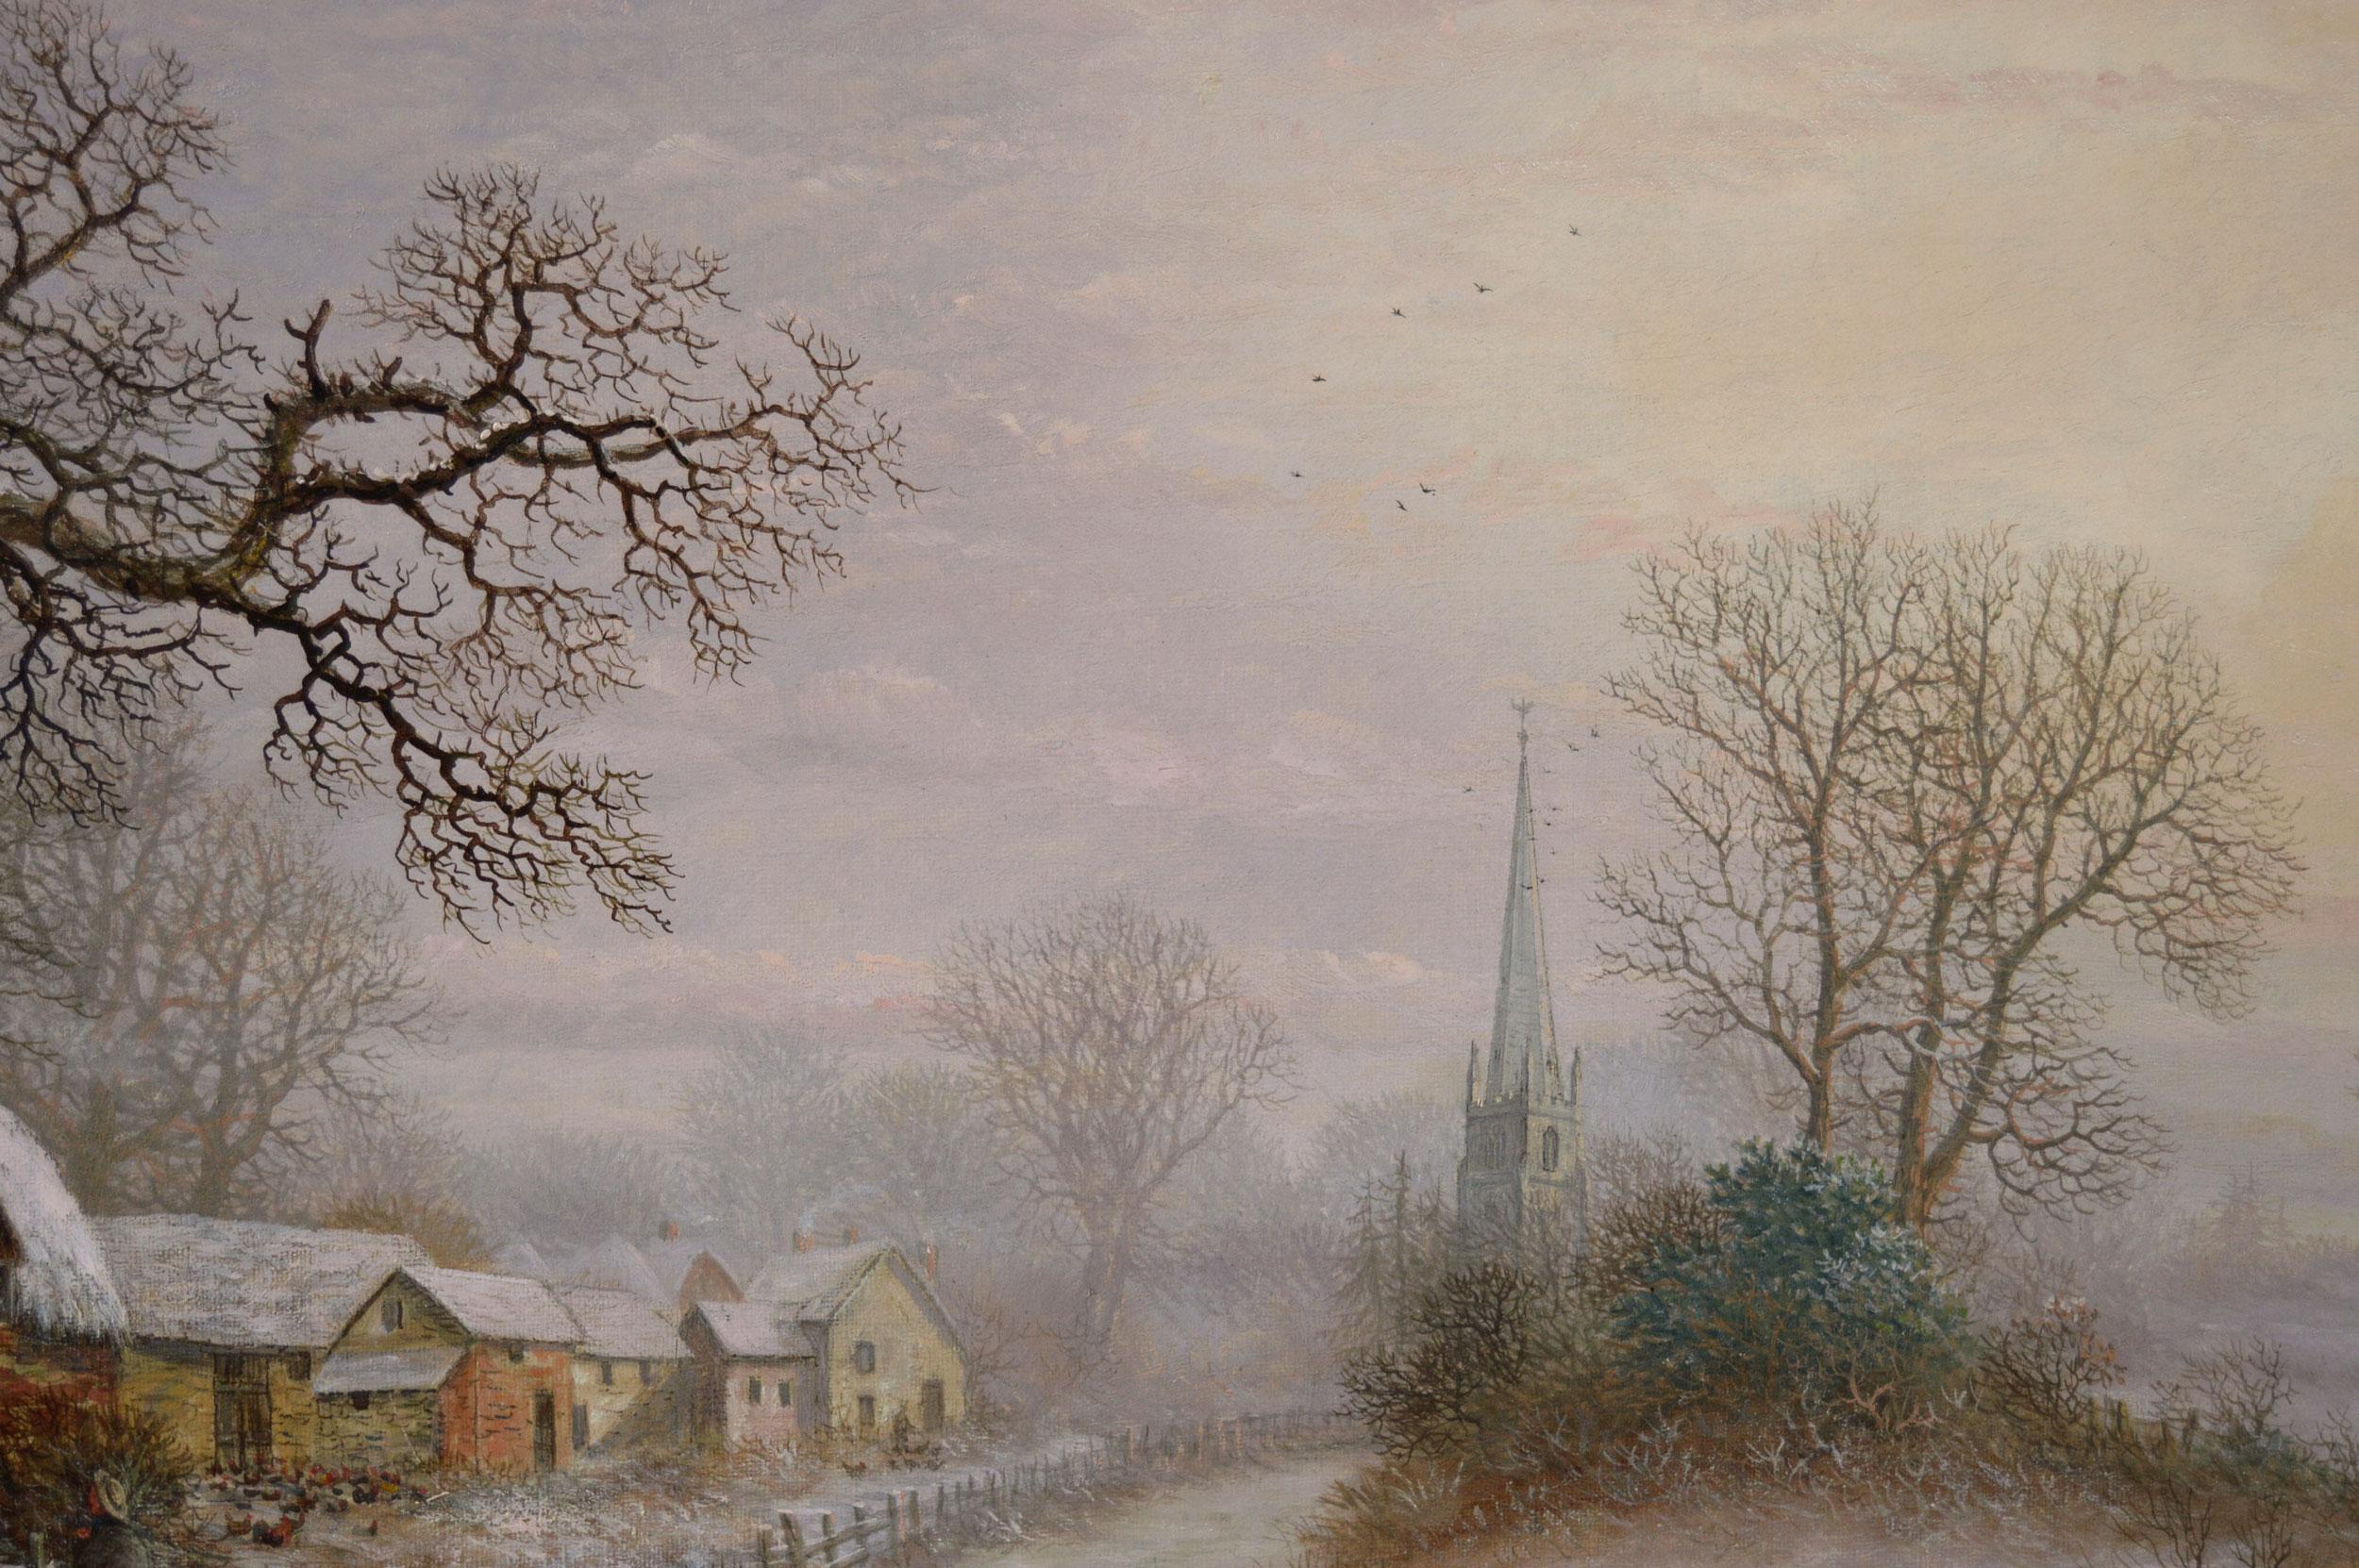 Charles Leaver 
British, (1824-1888)
A Winter’s Day, Kings Norton
Oil on canvas, signed & dated 1874
Image size: 14.25 inches x 26.5 inches
Size including frame: 21.25 inches x 33.5 inches

A beautiful winter scene of a Midlands village covered in